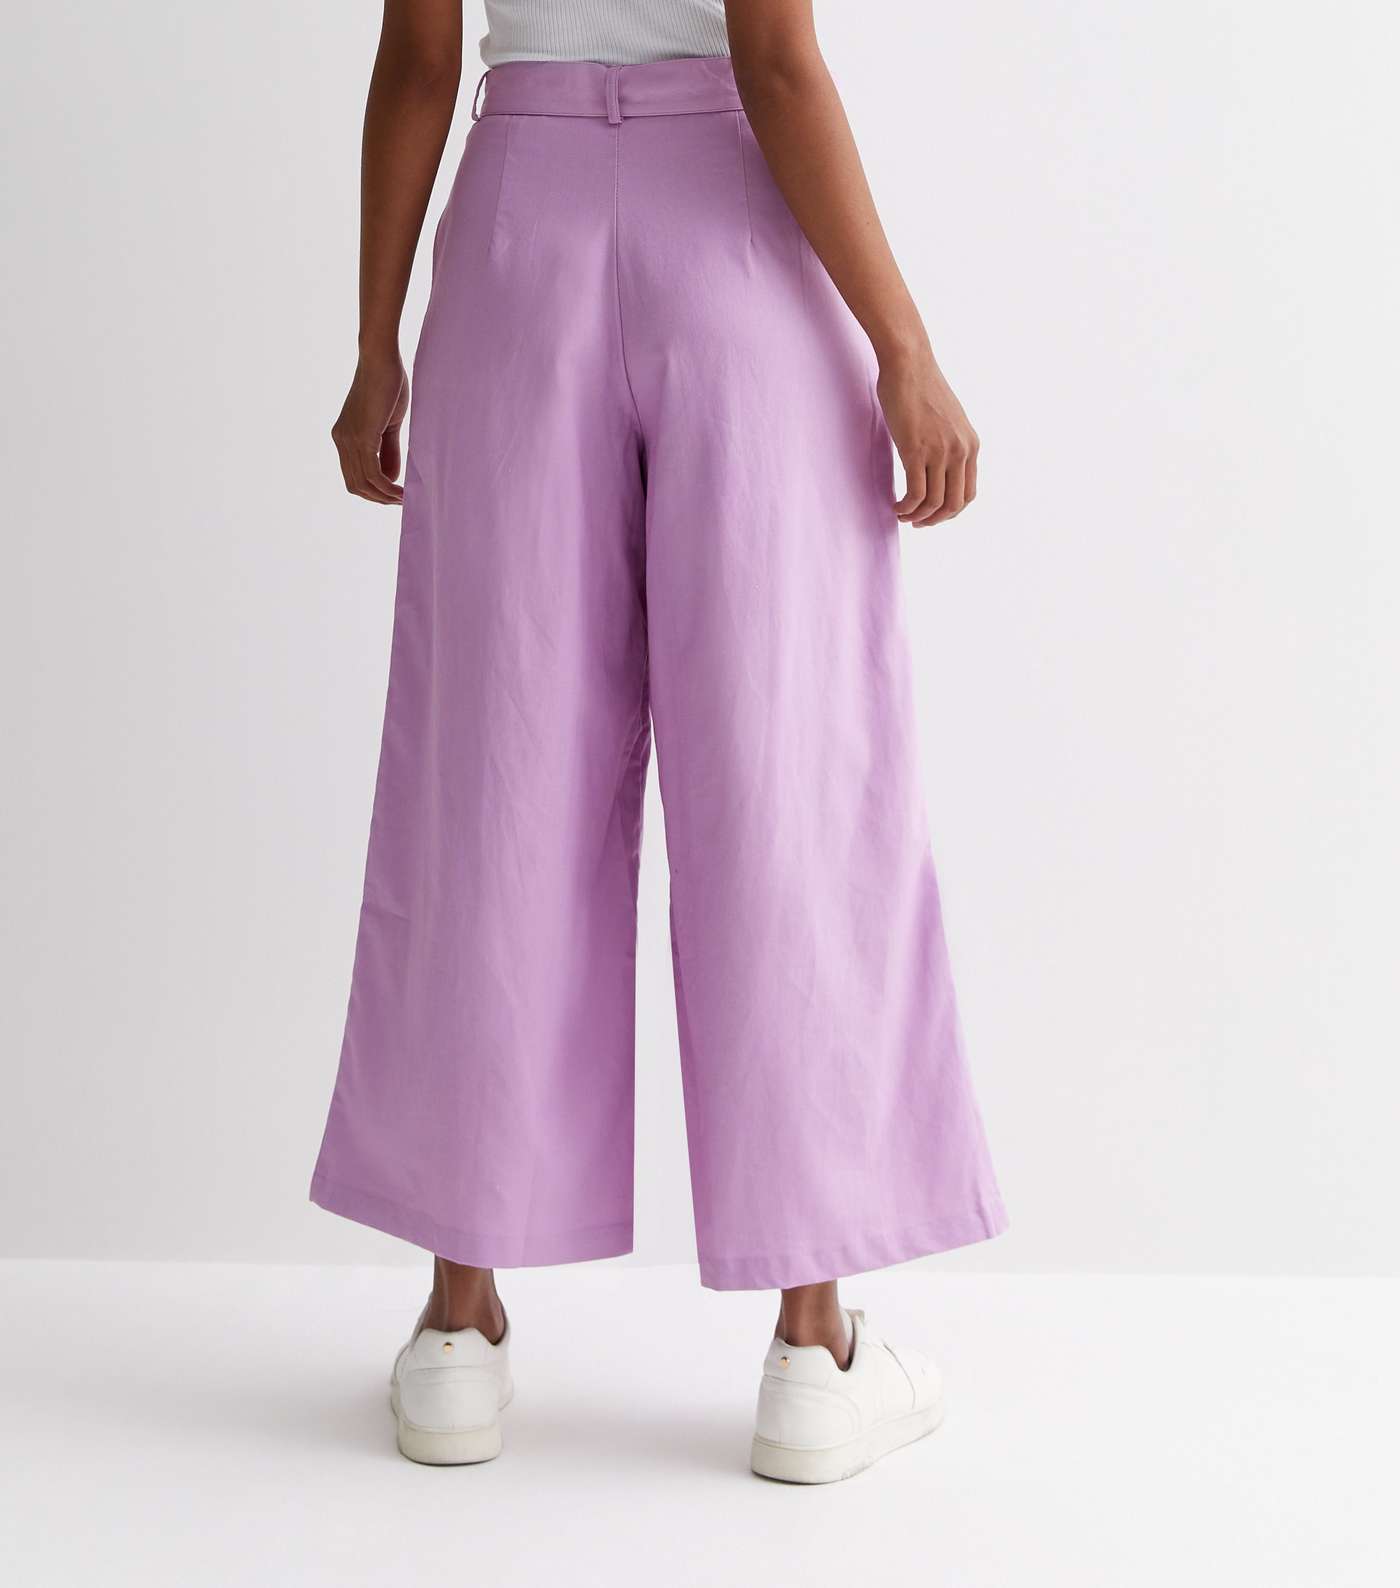 Gini London Lilac Linen-Look Belted Wide Leg Trousers Image 4